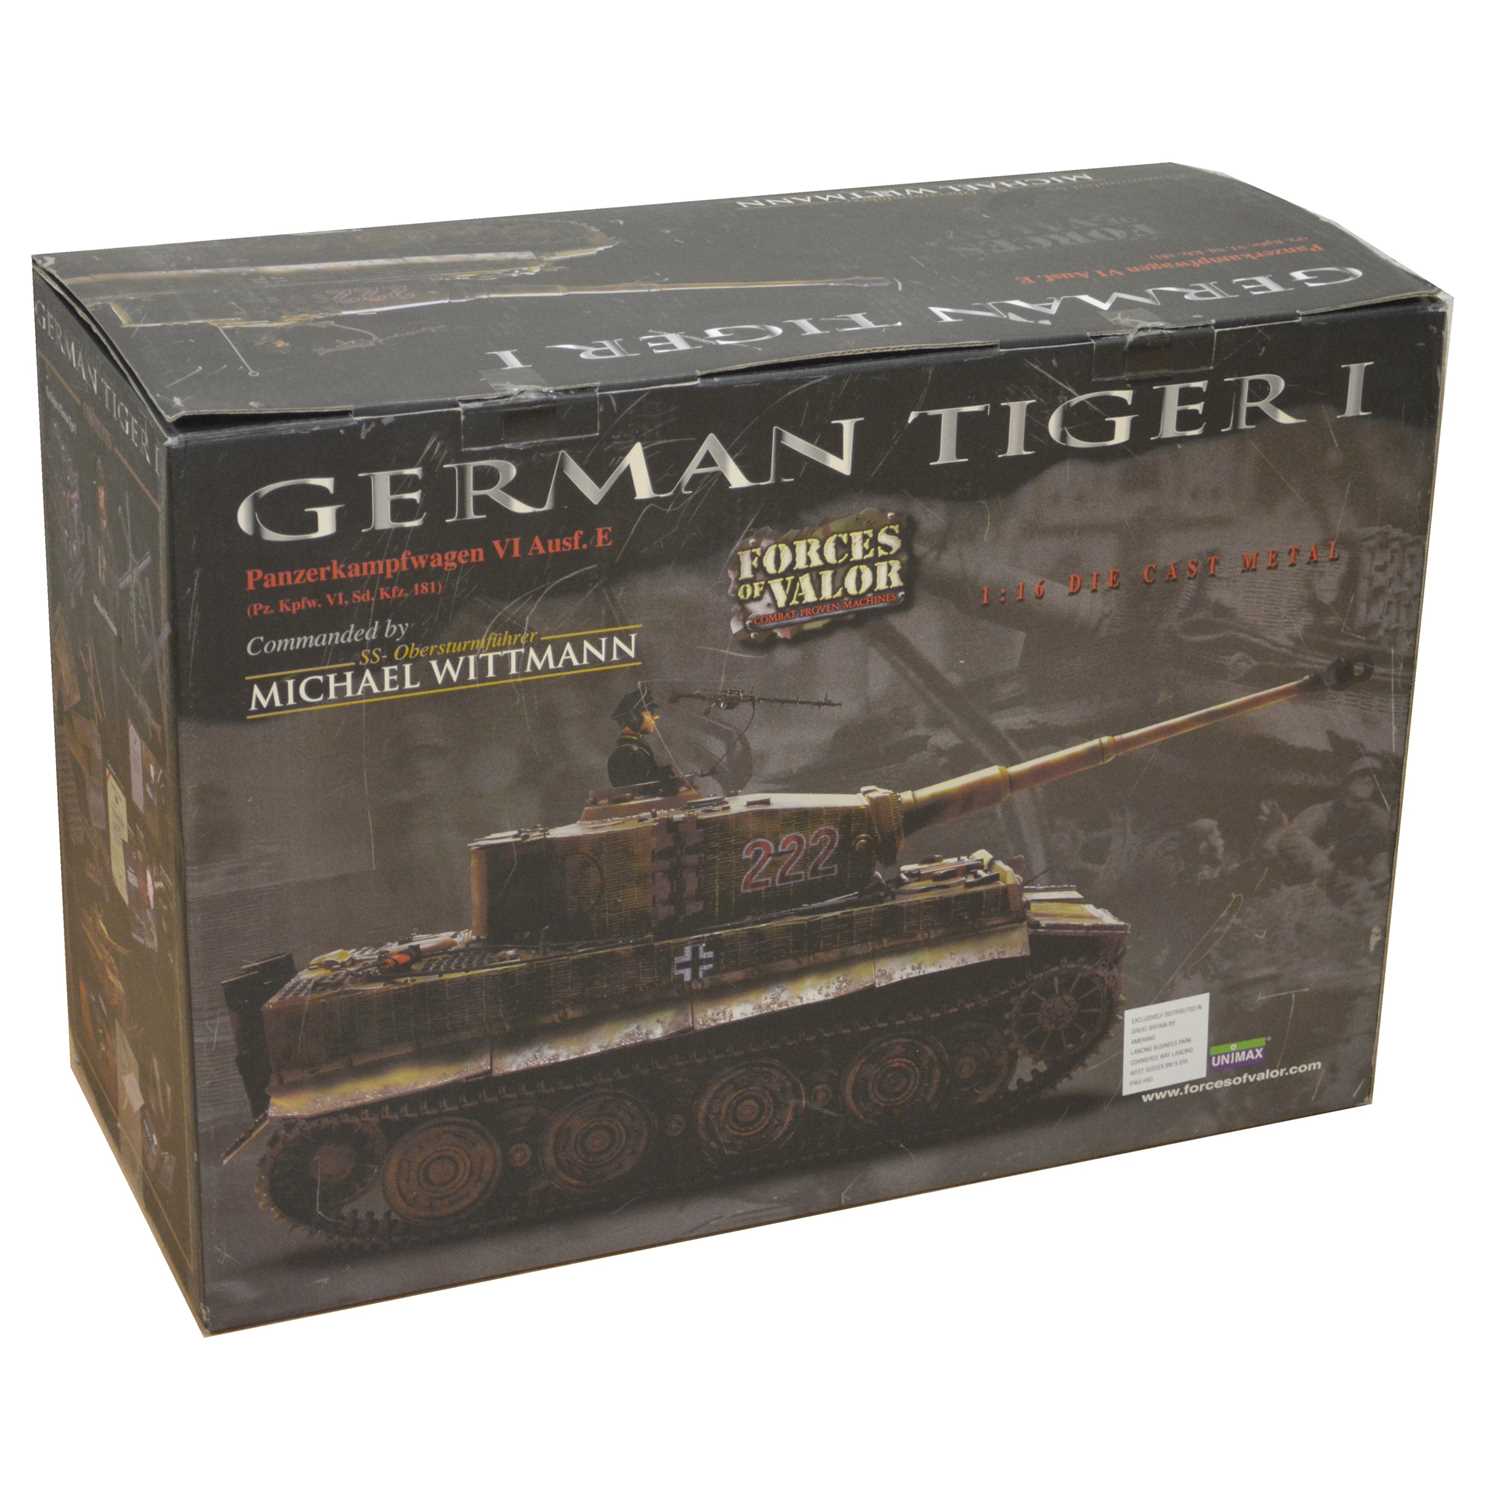 Lot 20 - Forces of Valor 1:16 die-cast model; German Tiger I tank (Commanded by Michael Wittmann)